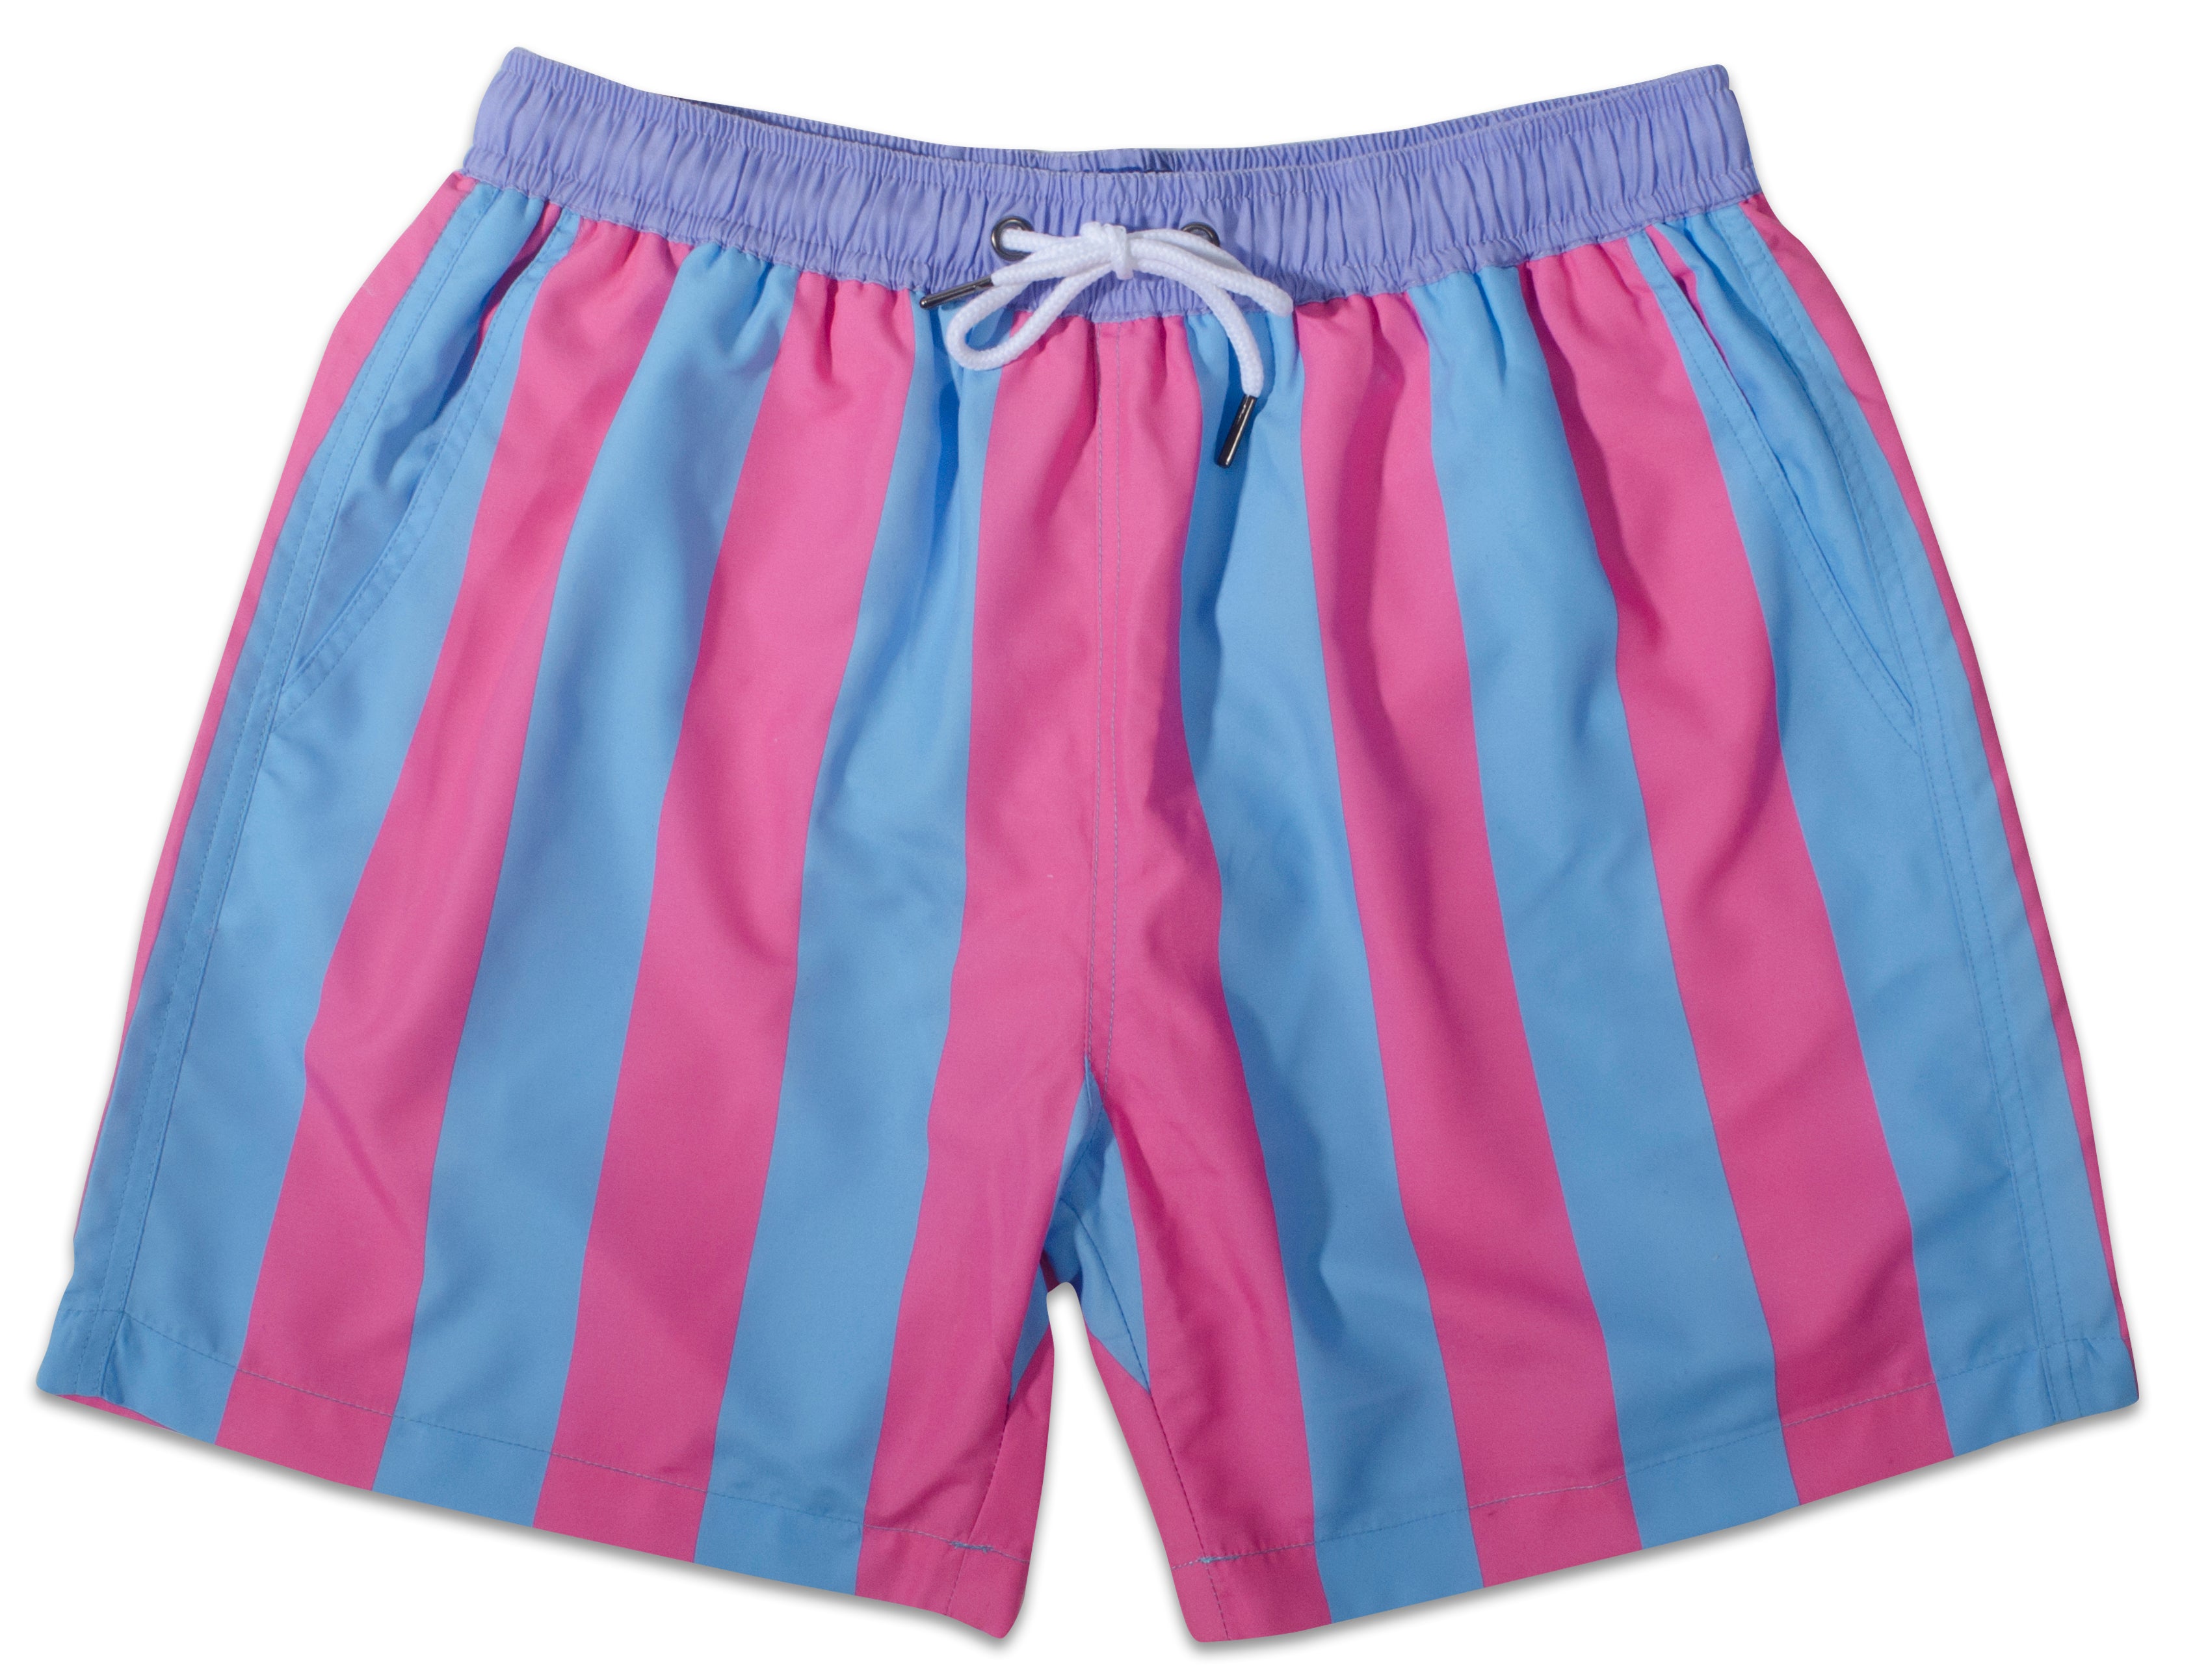 Zelos Women Small Pink Blue Colorful Side Stripes Graphic Activewear Shorts